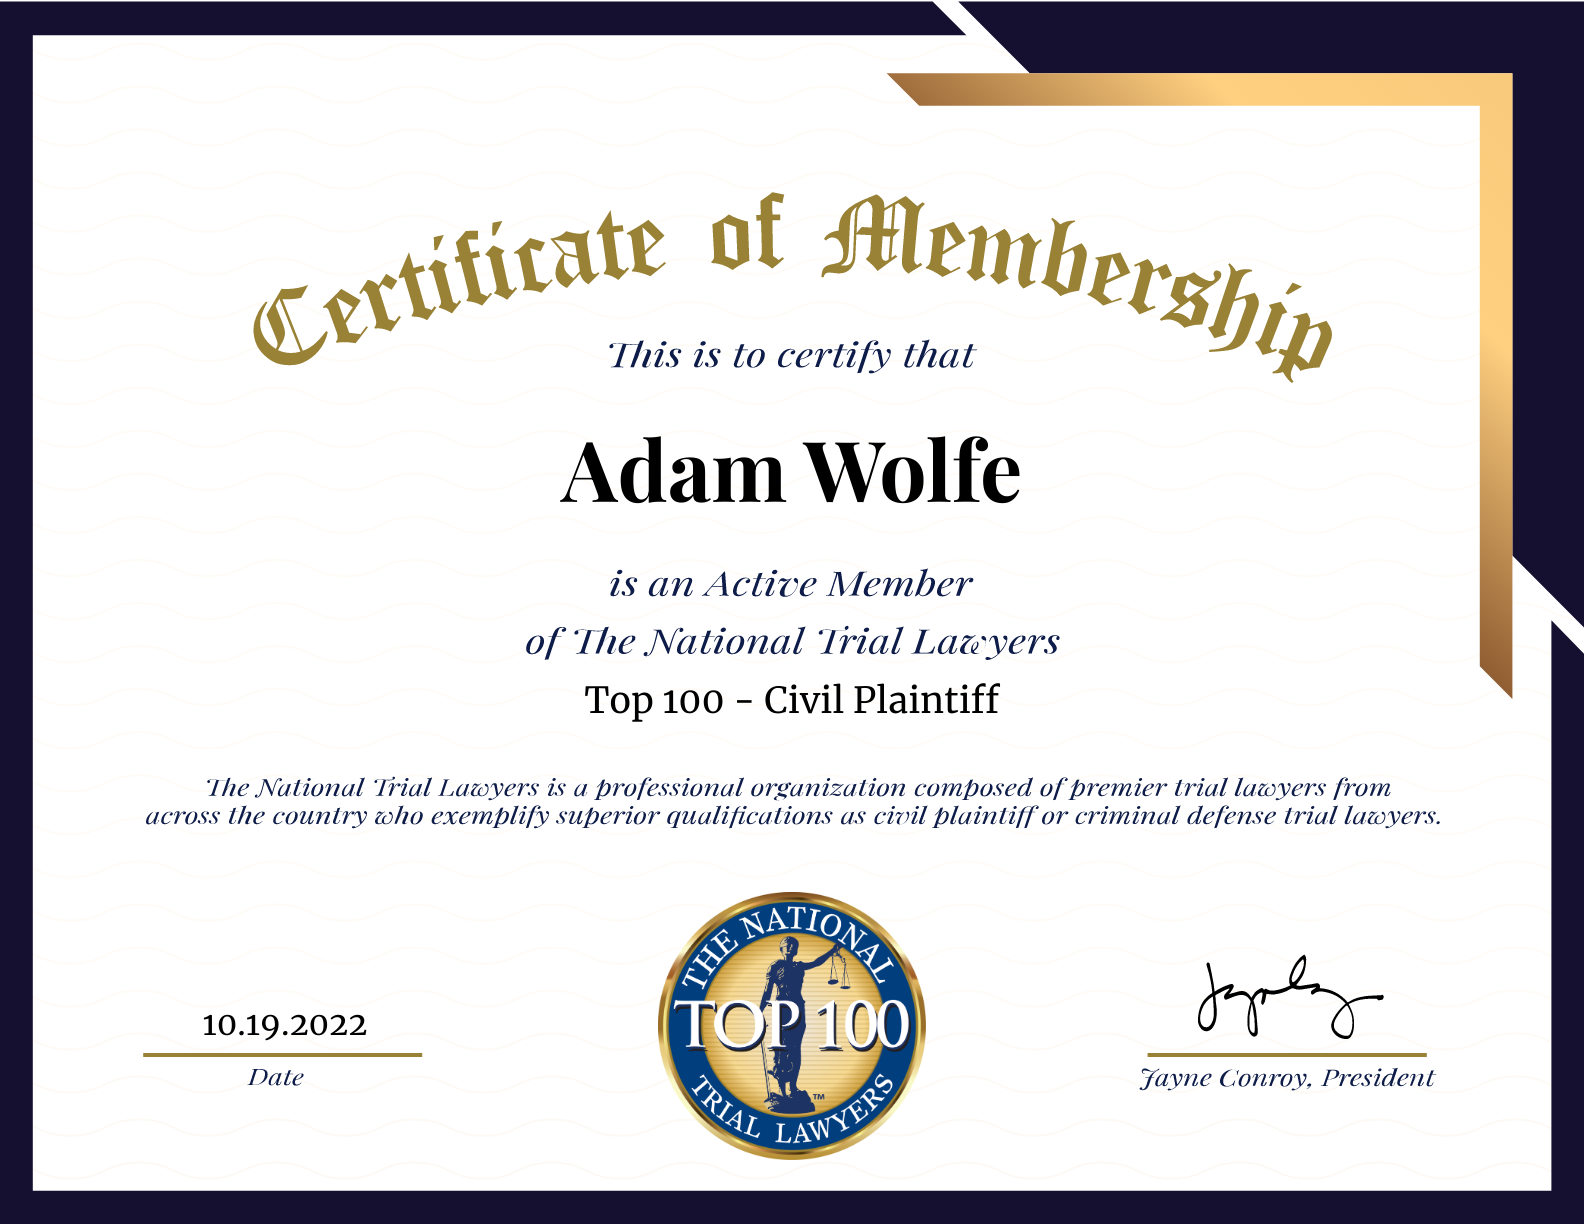 Certificate of Membership This is to certify that Adam Wolfe is an Active Member of The National Trial Lawyers Top 100 - Civil Plaintiff